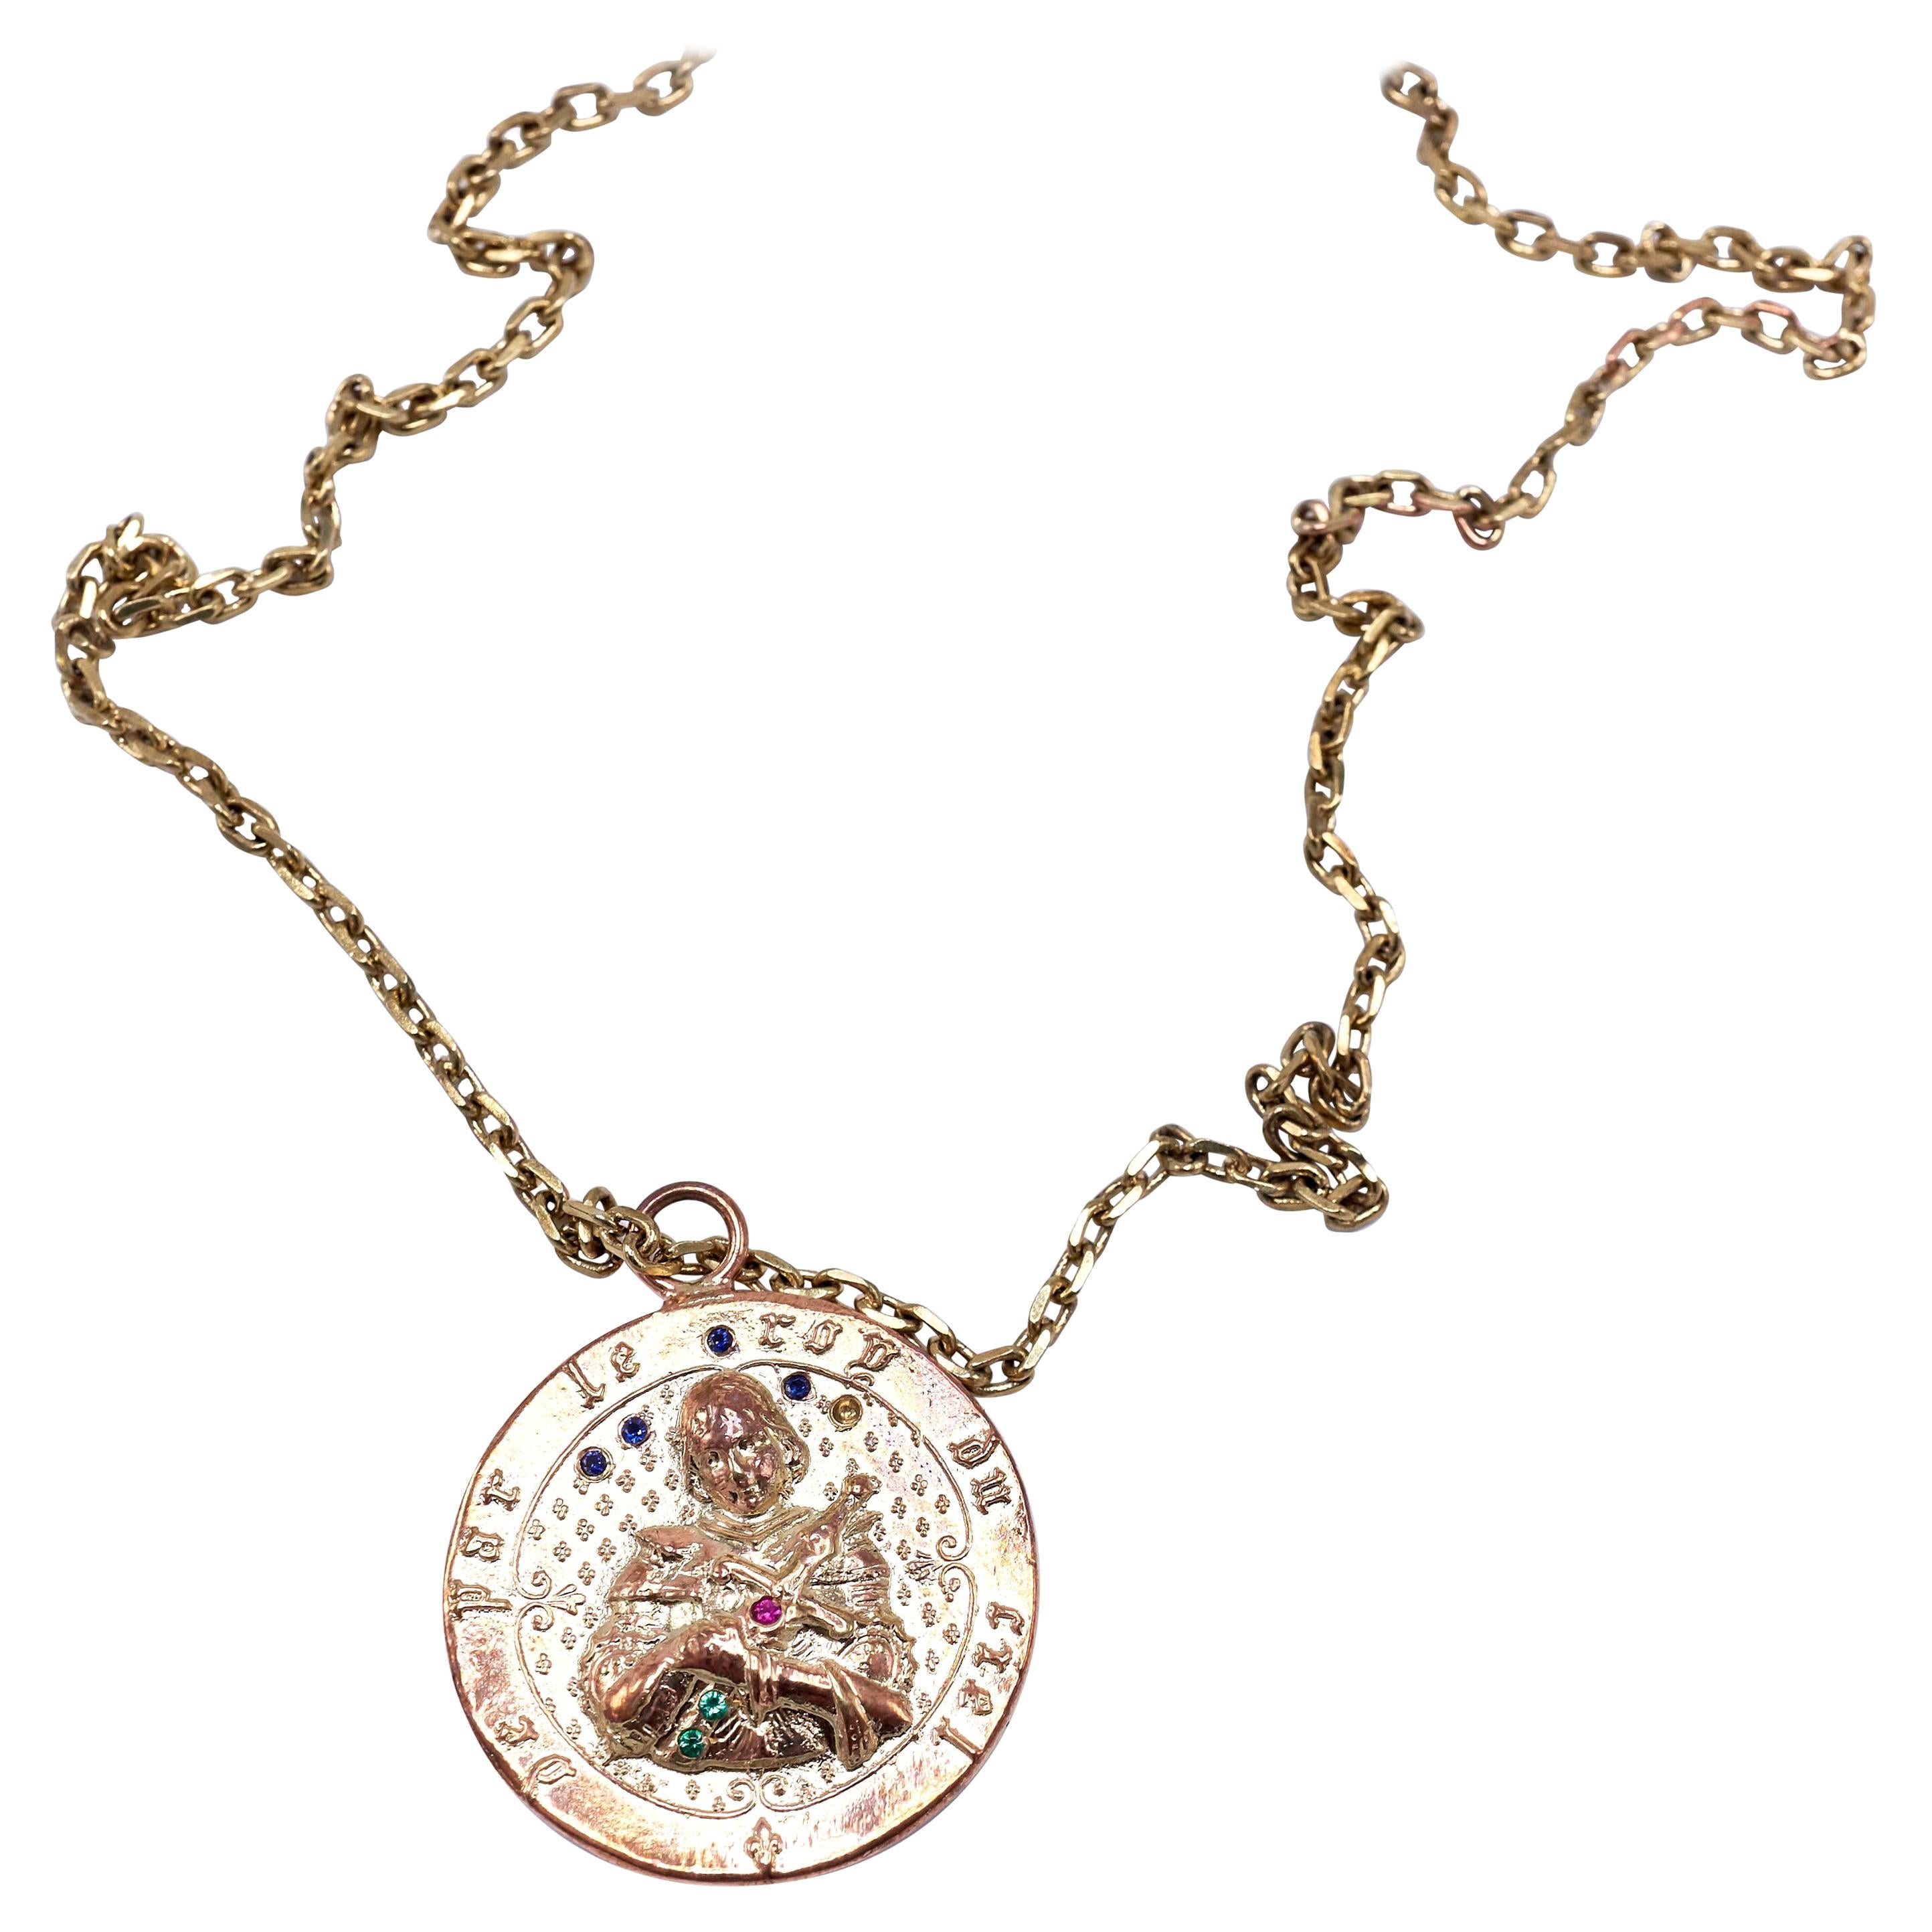 Joan of Arc Medal Gold Plated Necklace Ruby Emerald Blue Sapphire J DAUPHIN

J DAUPHIN 